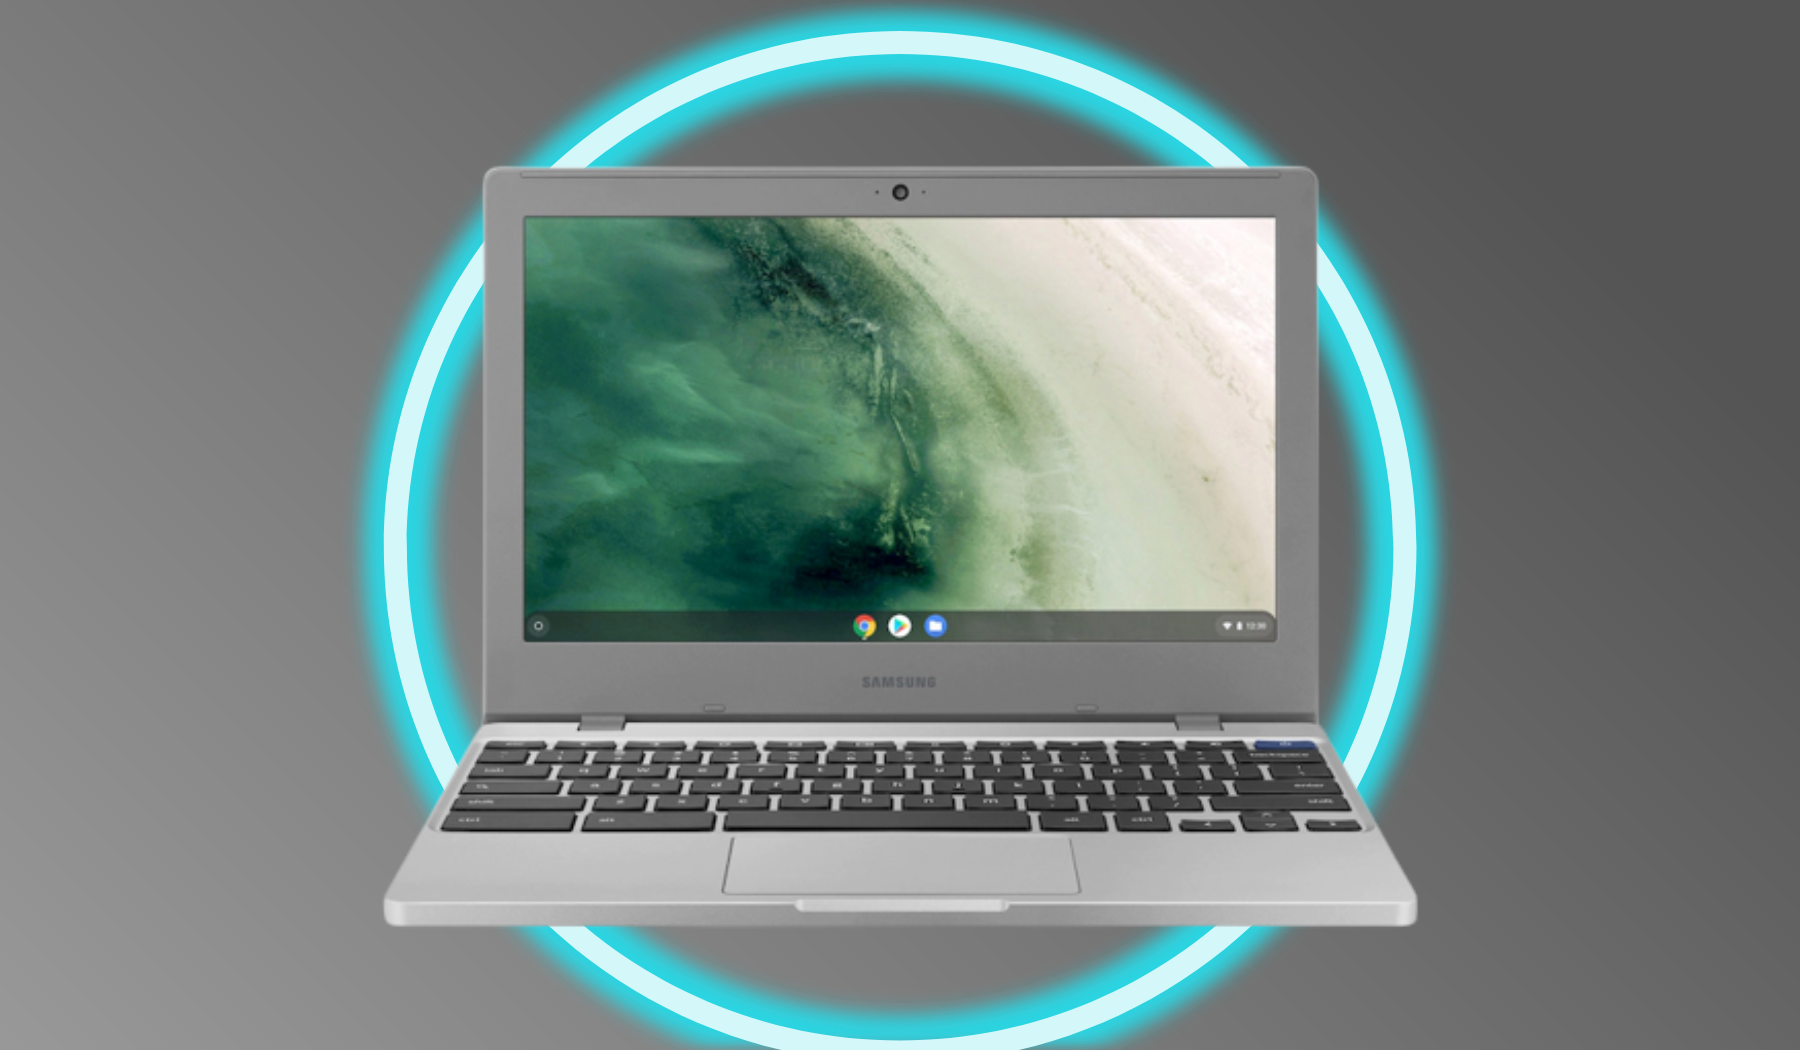 Samsung Chromebook with neon circle on gray background